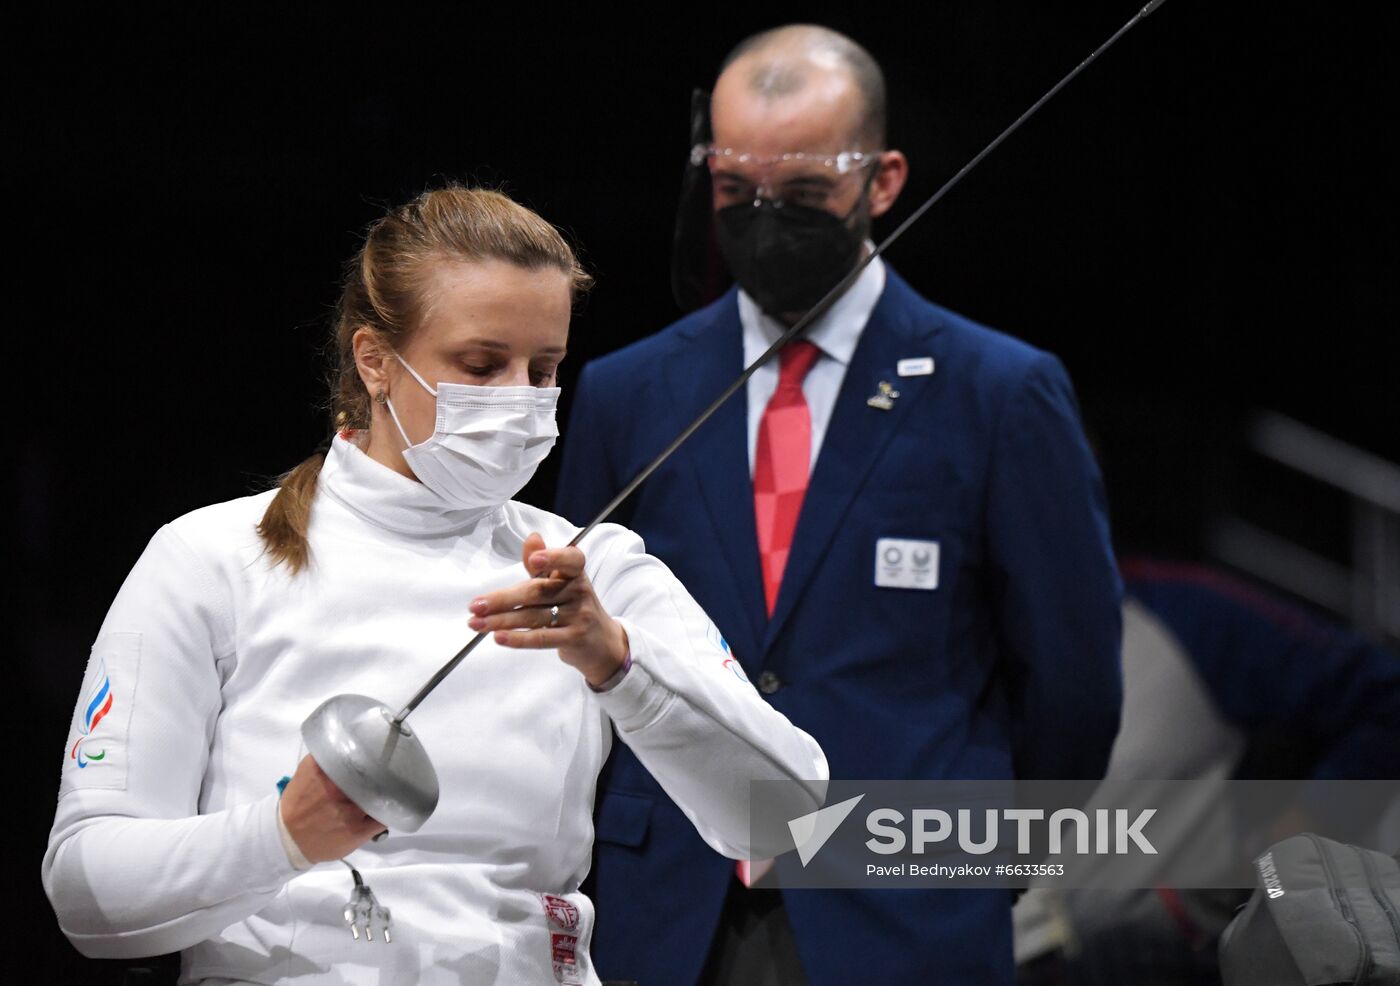 Japan Paralympics 2020 Wheelchair Fencing Epee Individual